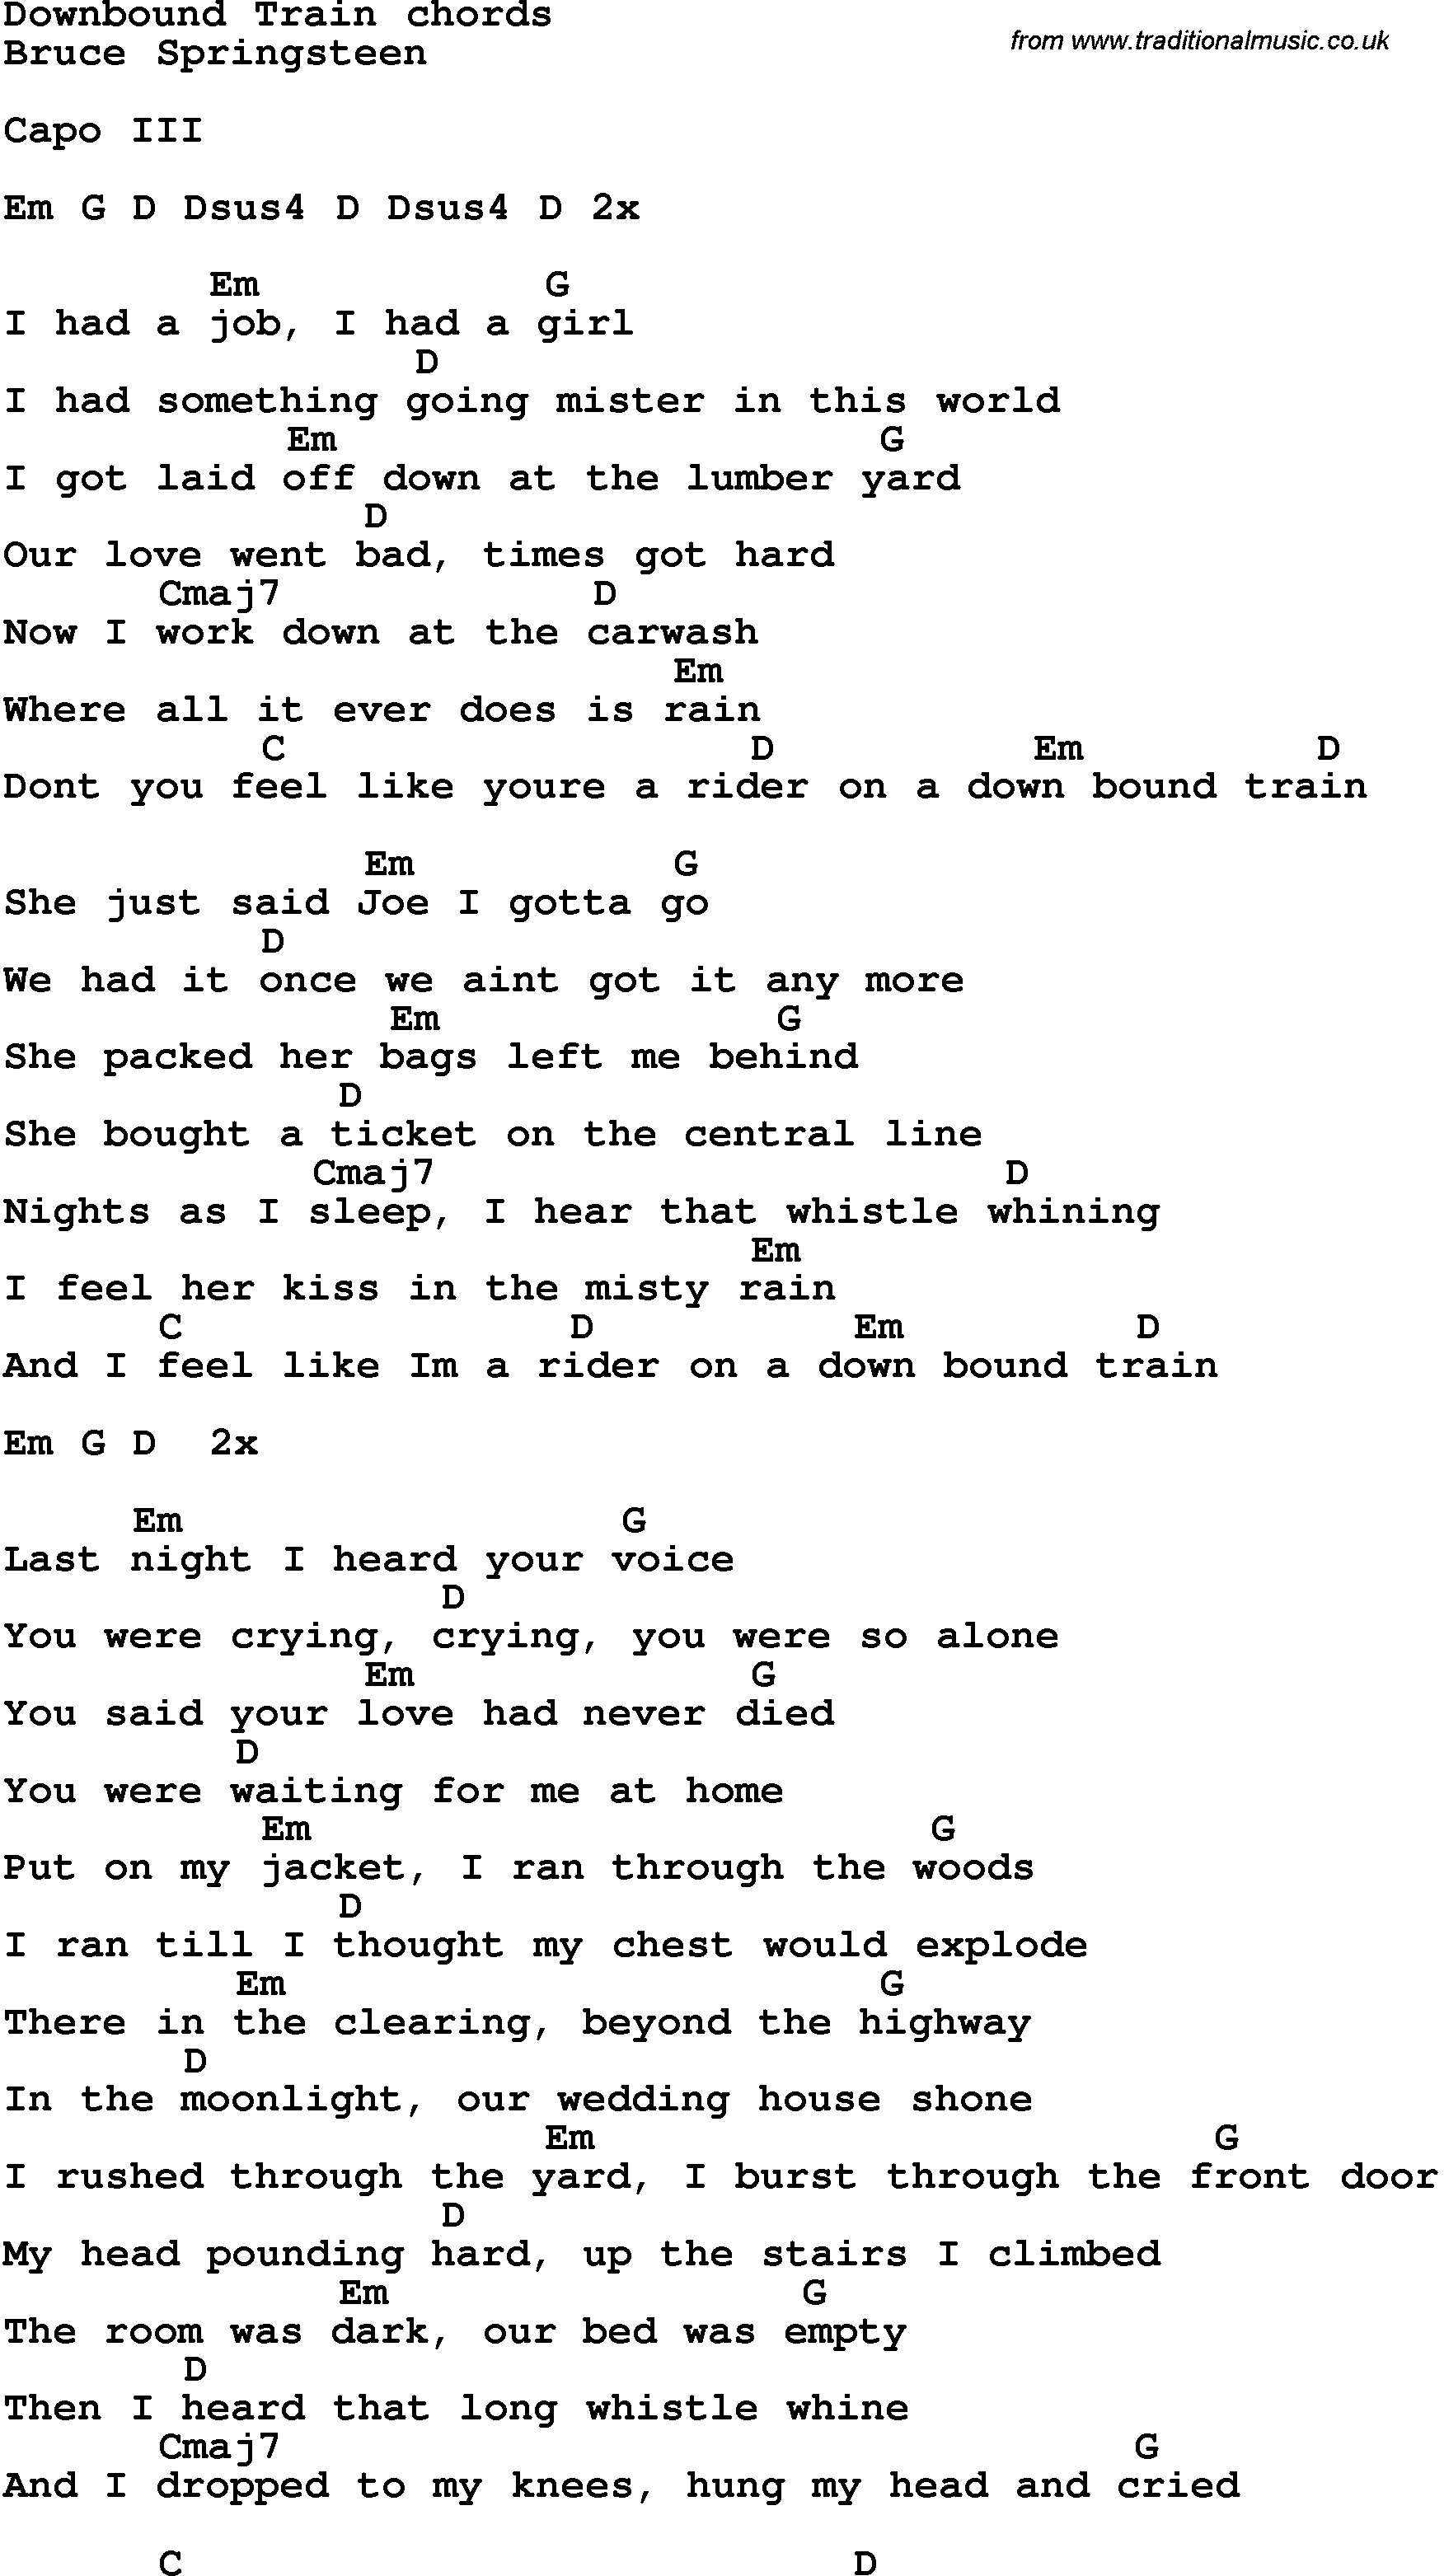 Song Lyrics with guitar chords for Downbound Train